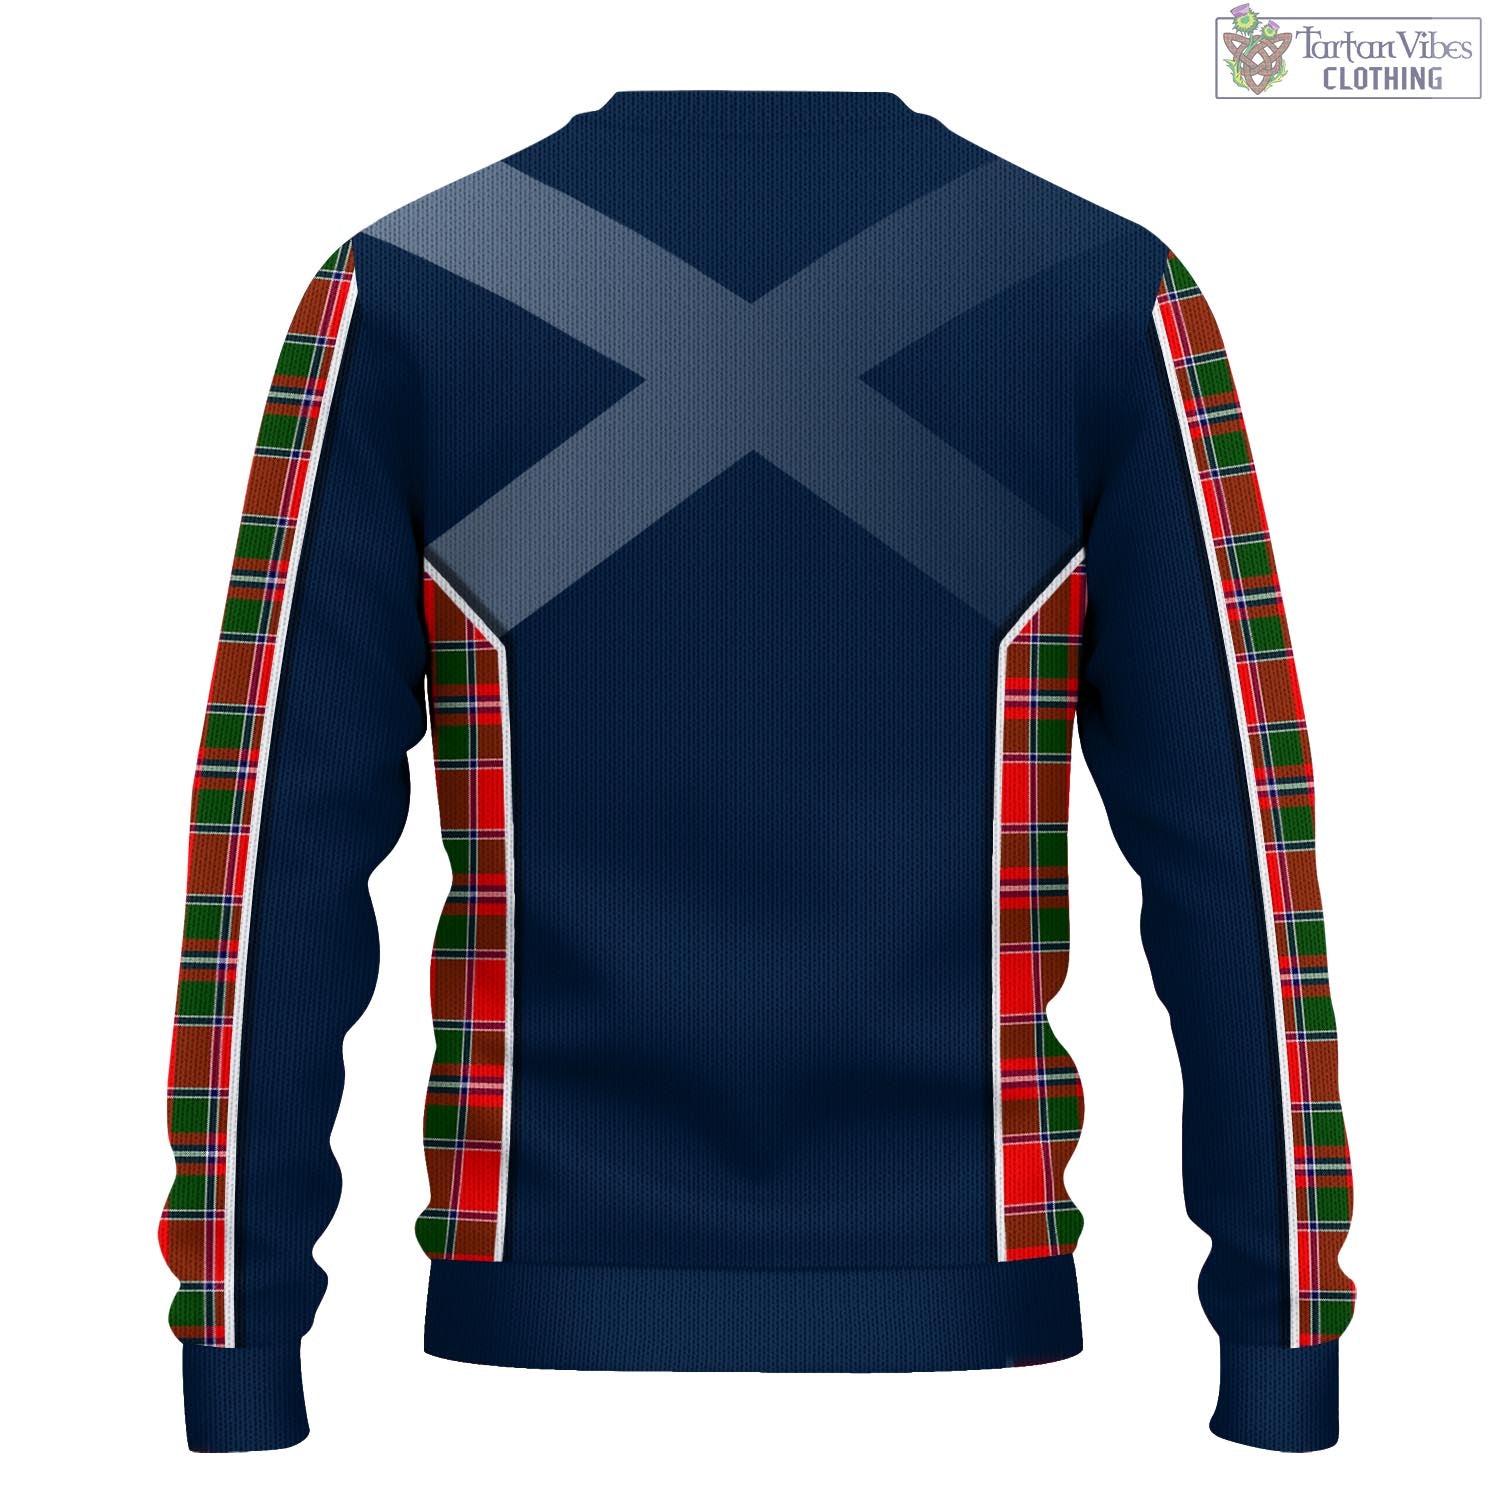 Tartan Vibes Clothing Spens Modern Tartan Knitted Sweatshirt with Family Crest and Scottish Thistle Vibes Sport Style